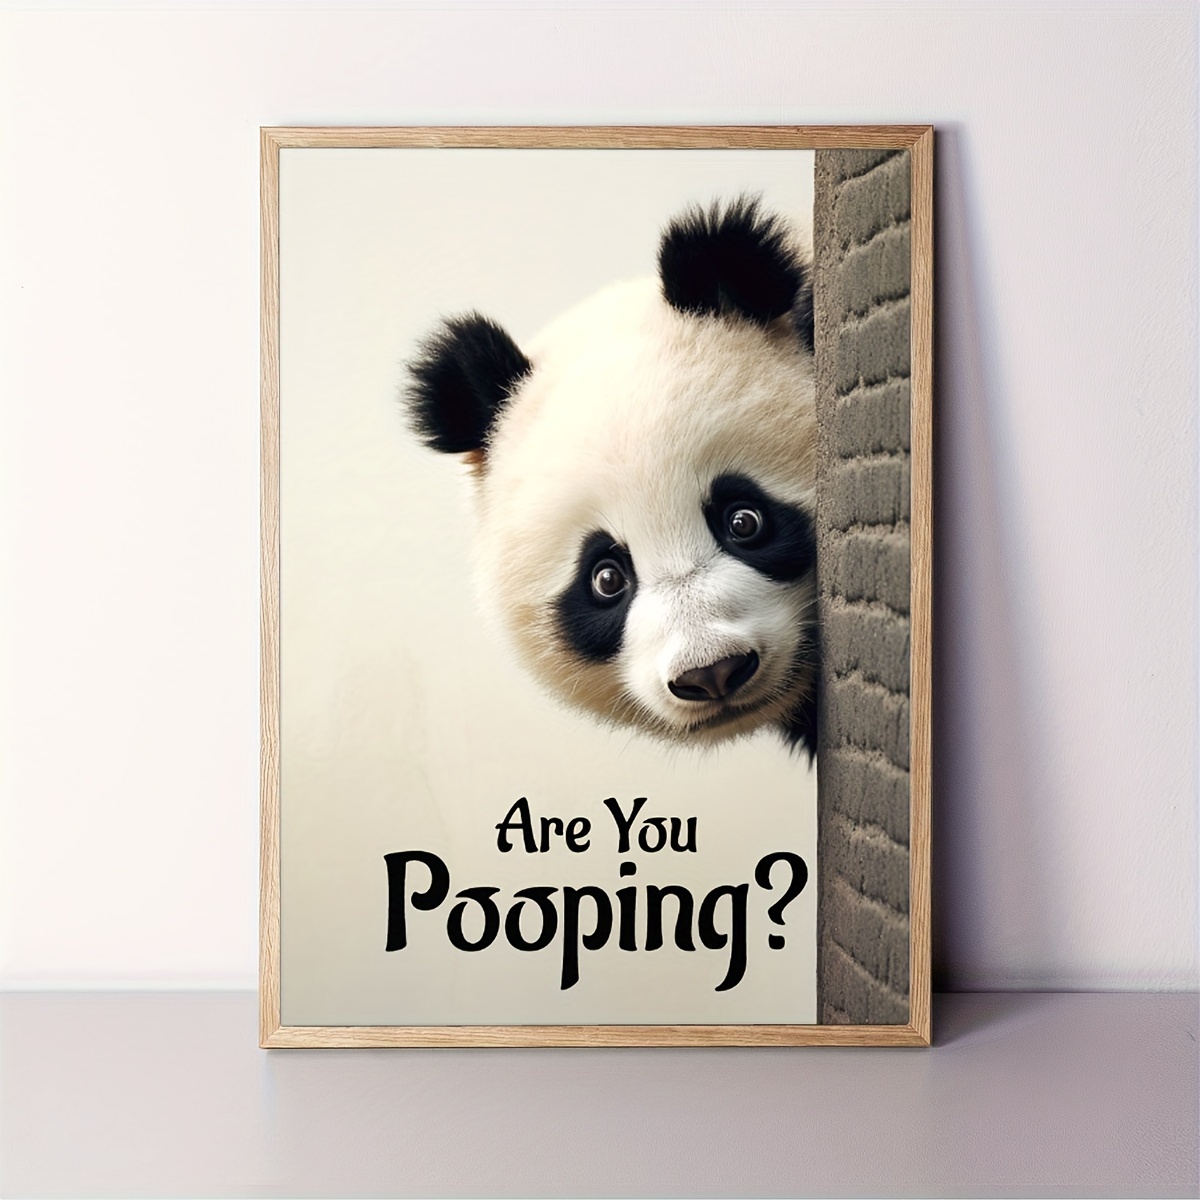 

Panda Peeking "are You Pooping" Funny Canvas Wall Art Poster For Home, Bedroom, Kitchen, Living Room, Bathroom, Hotel, Cafe, Office Decor - Unframed, 12x16 Inch - 1pc, High-quality Material